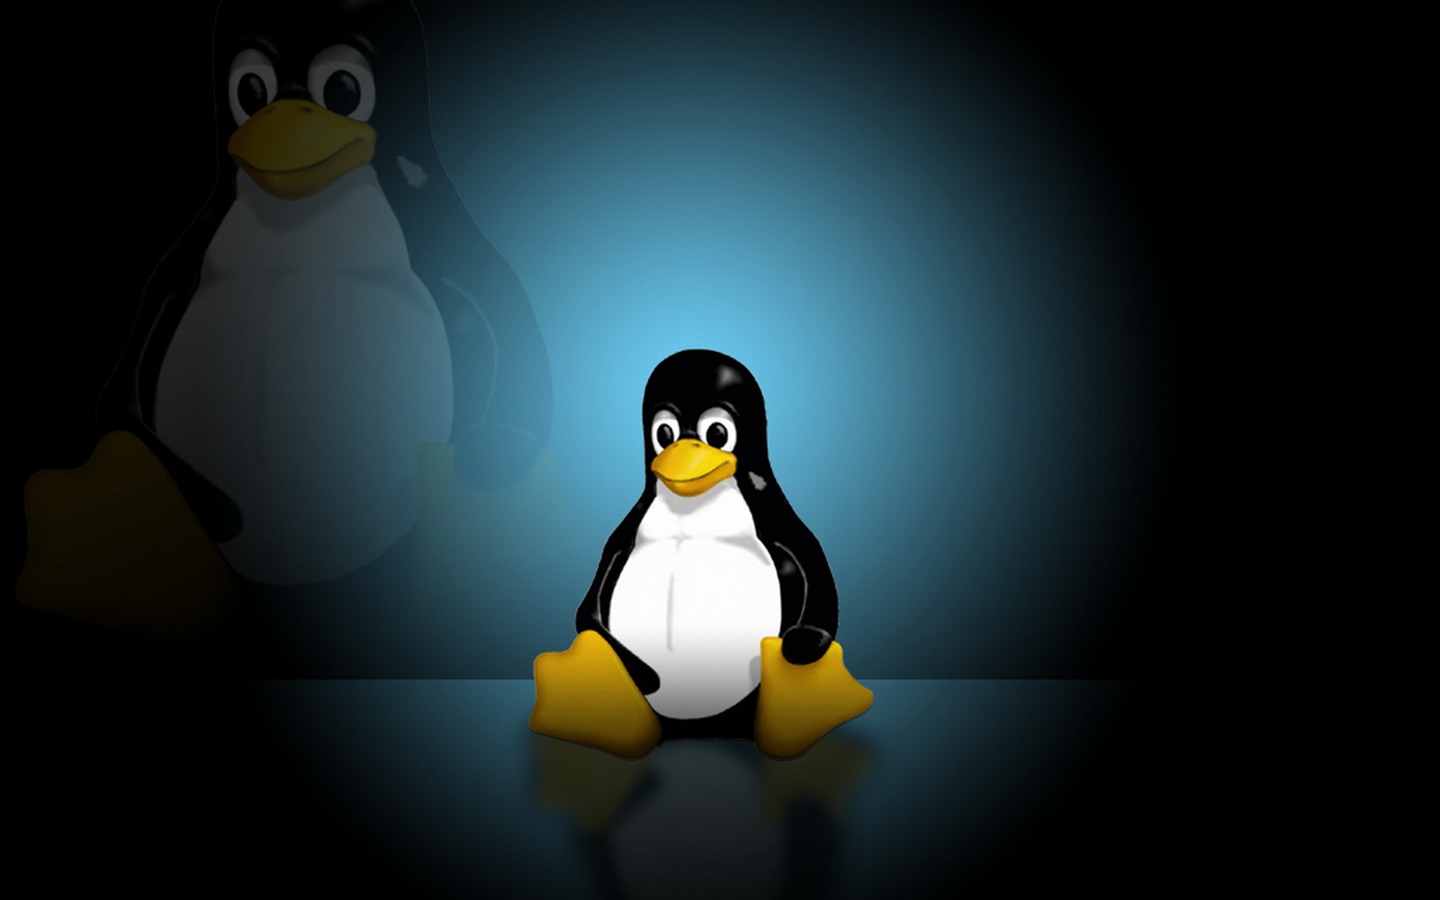 Linux tapety (2) #6 - 1440x900